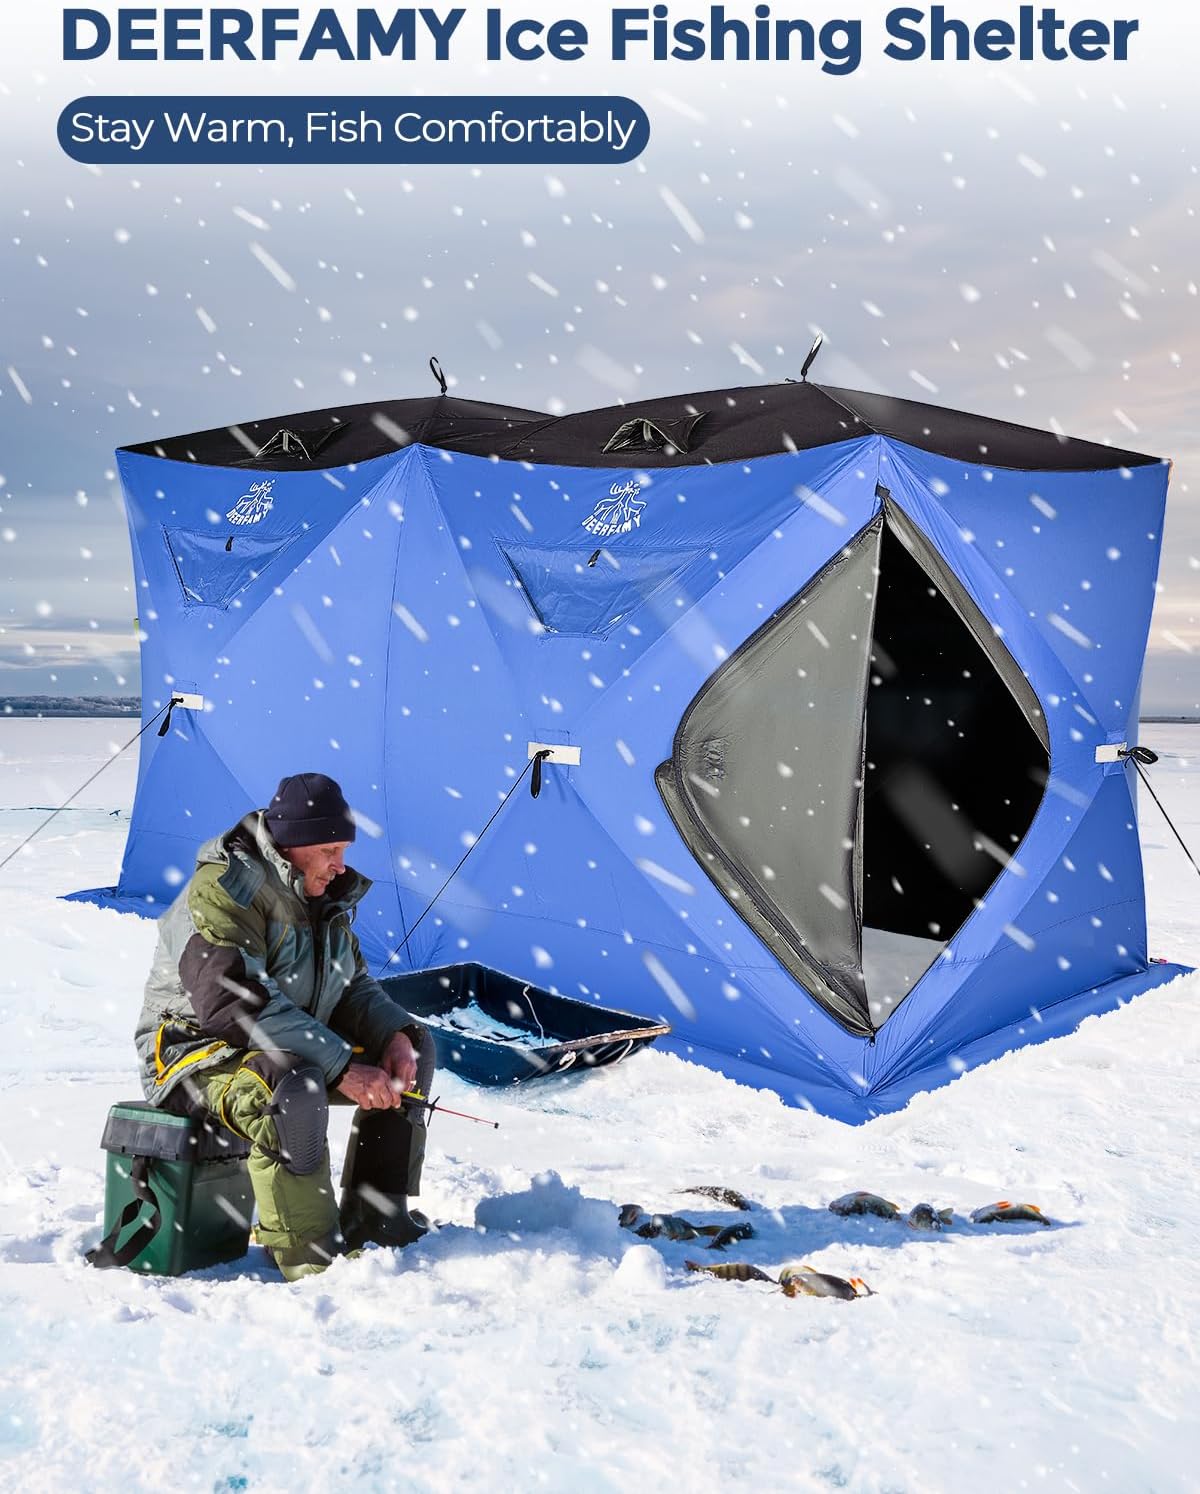 Portable 3 Person Ice Fishing Tent - Insulated Ice Fishing Shelter -  Outdoor Camping Ice Fishing Tents with Insulated Layer for Ice Fishing  Winter